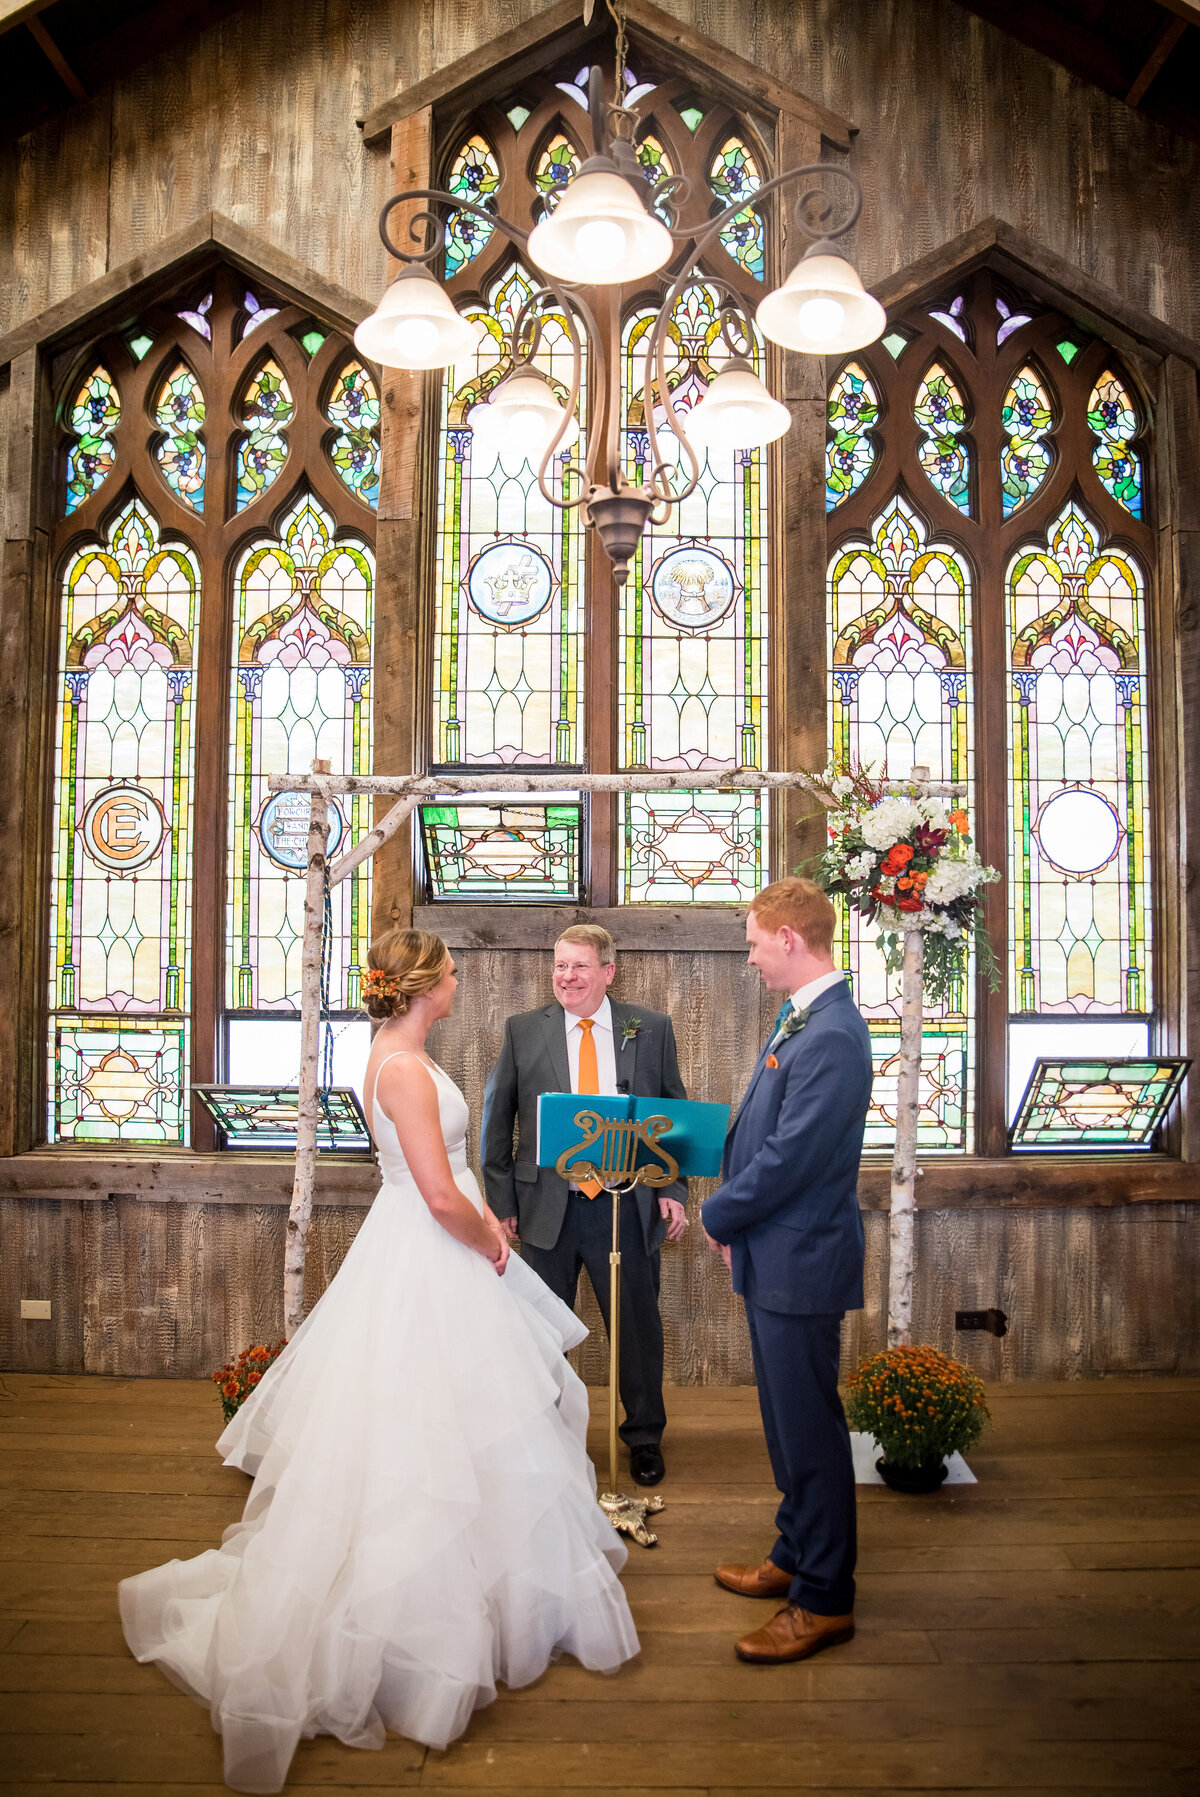 A bride, groom, and officiant stand at the front of a chapel during the ceremony with ornate stained glass windows in the background.